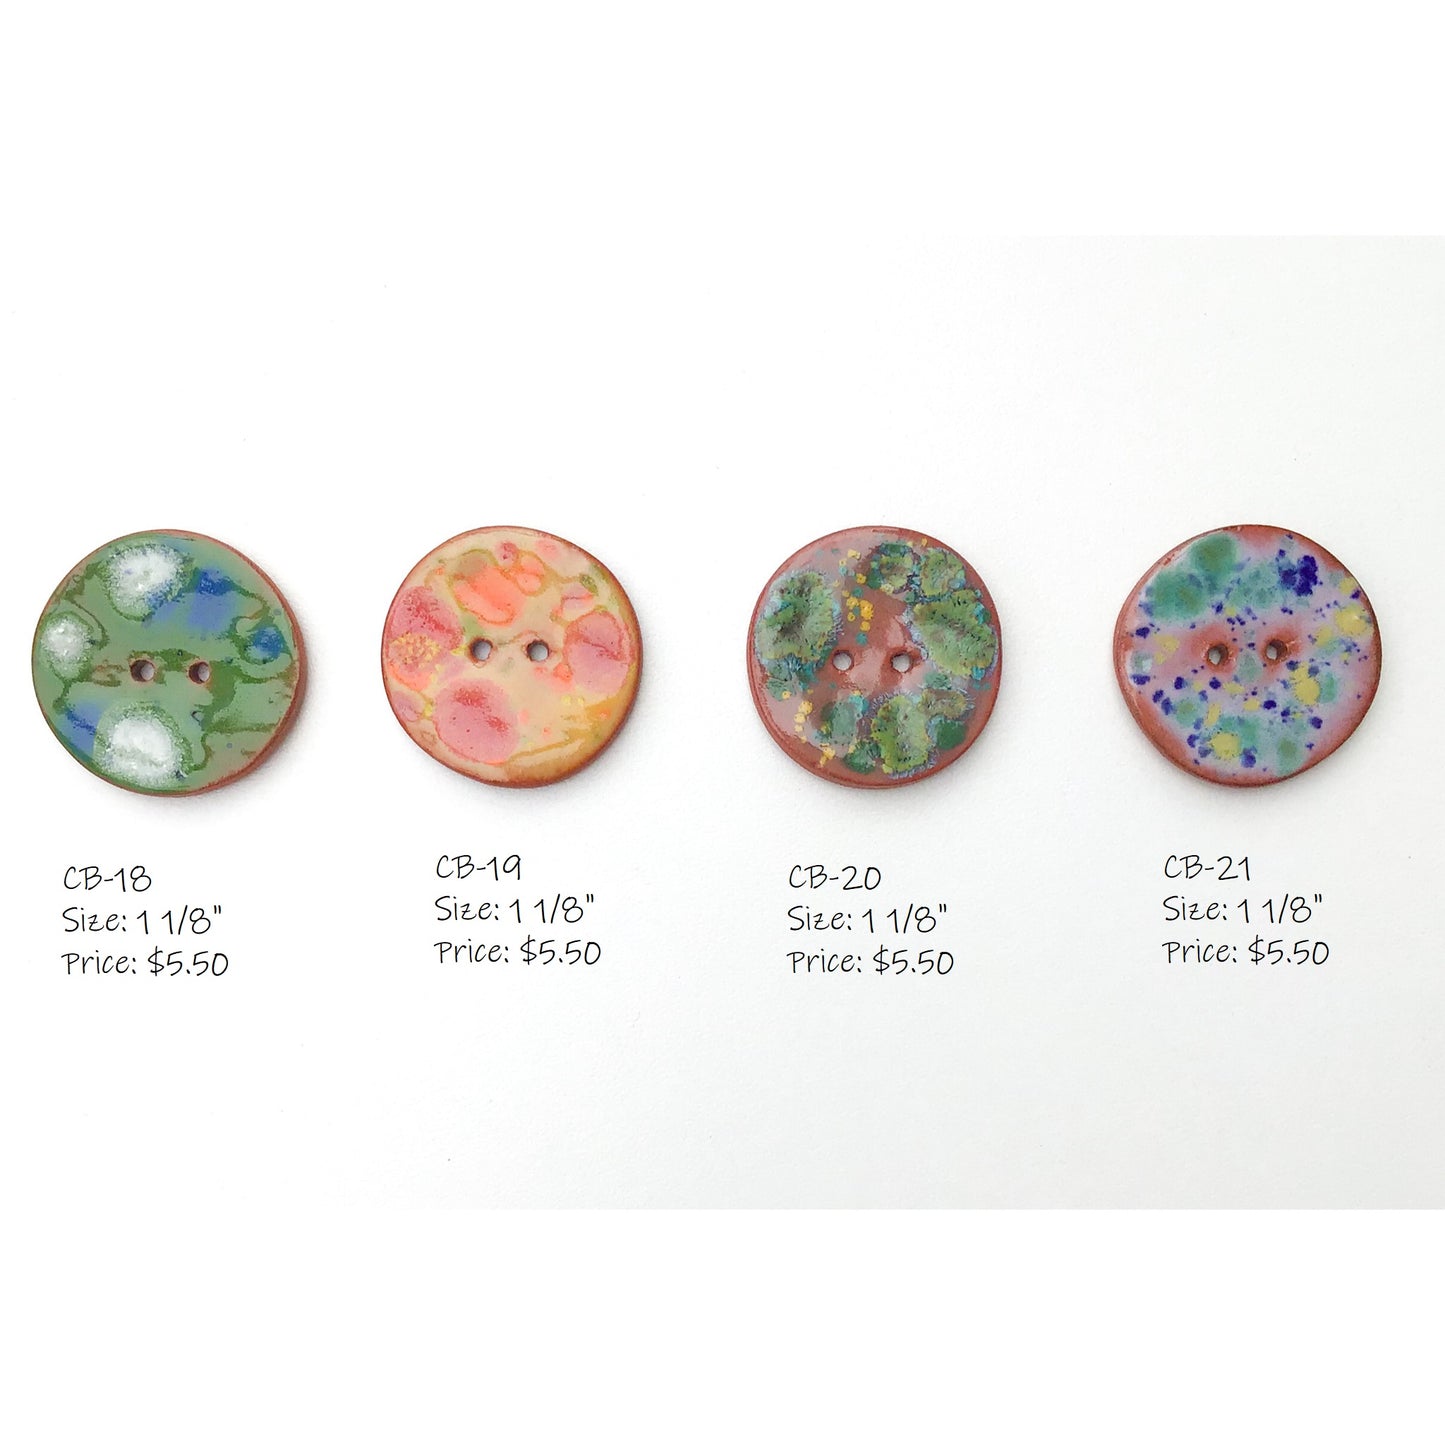 Color Burst Buttons : Colorful Ceramic Buttons with a Splash of Color (ws-51)